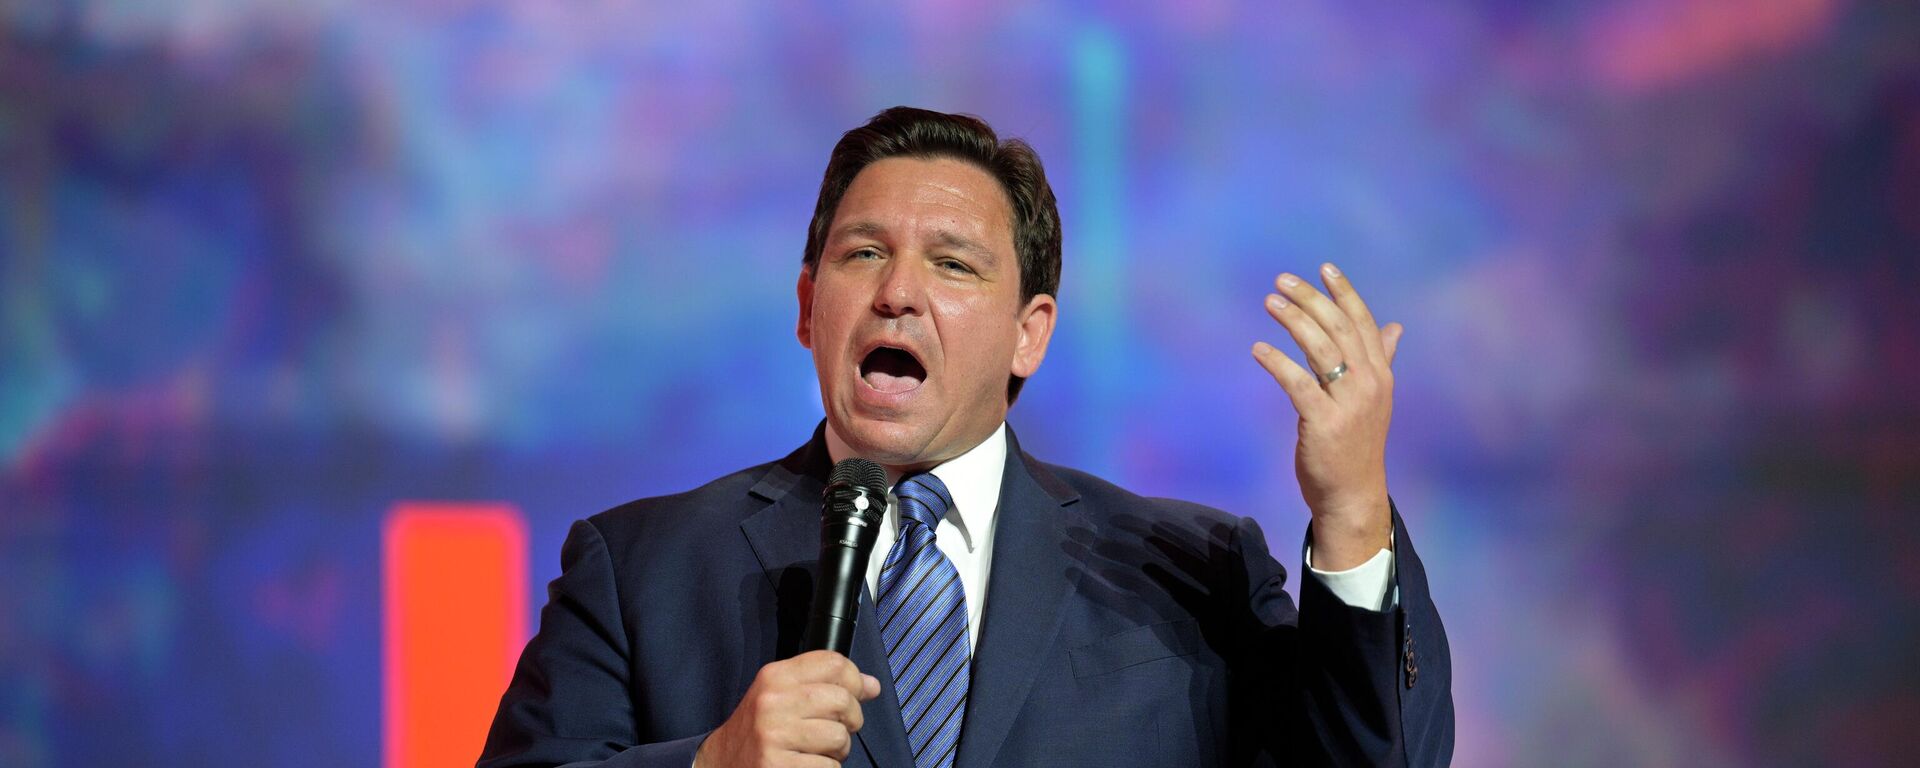 FILE - Florida Governor Ron DeSantis addresses attendees at the Turning Point USA Student Action Summit, Friday, July 22, 2022, in Tampa, Fla. - Sputnik International, 1920, 25.05.2023